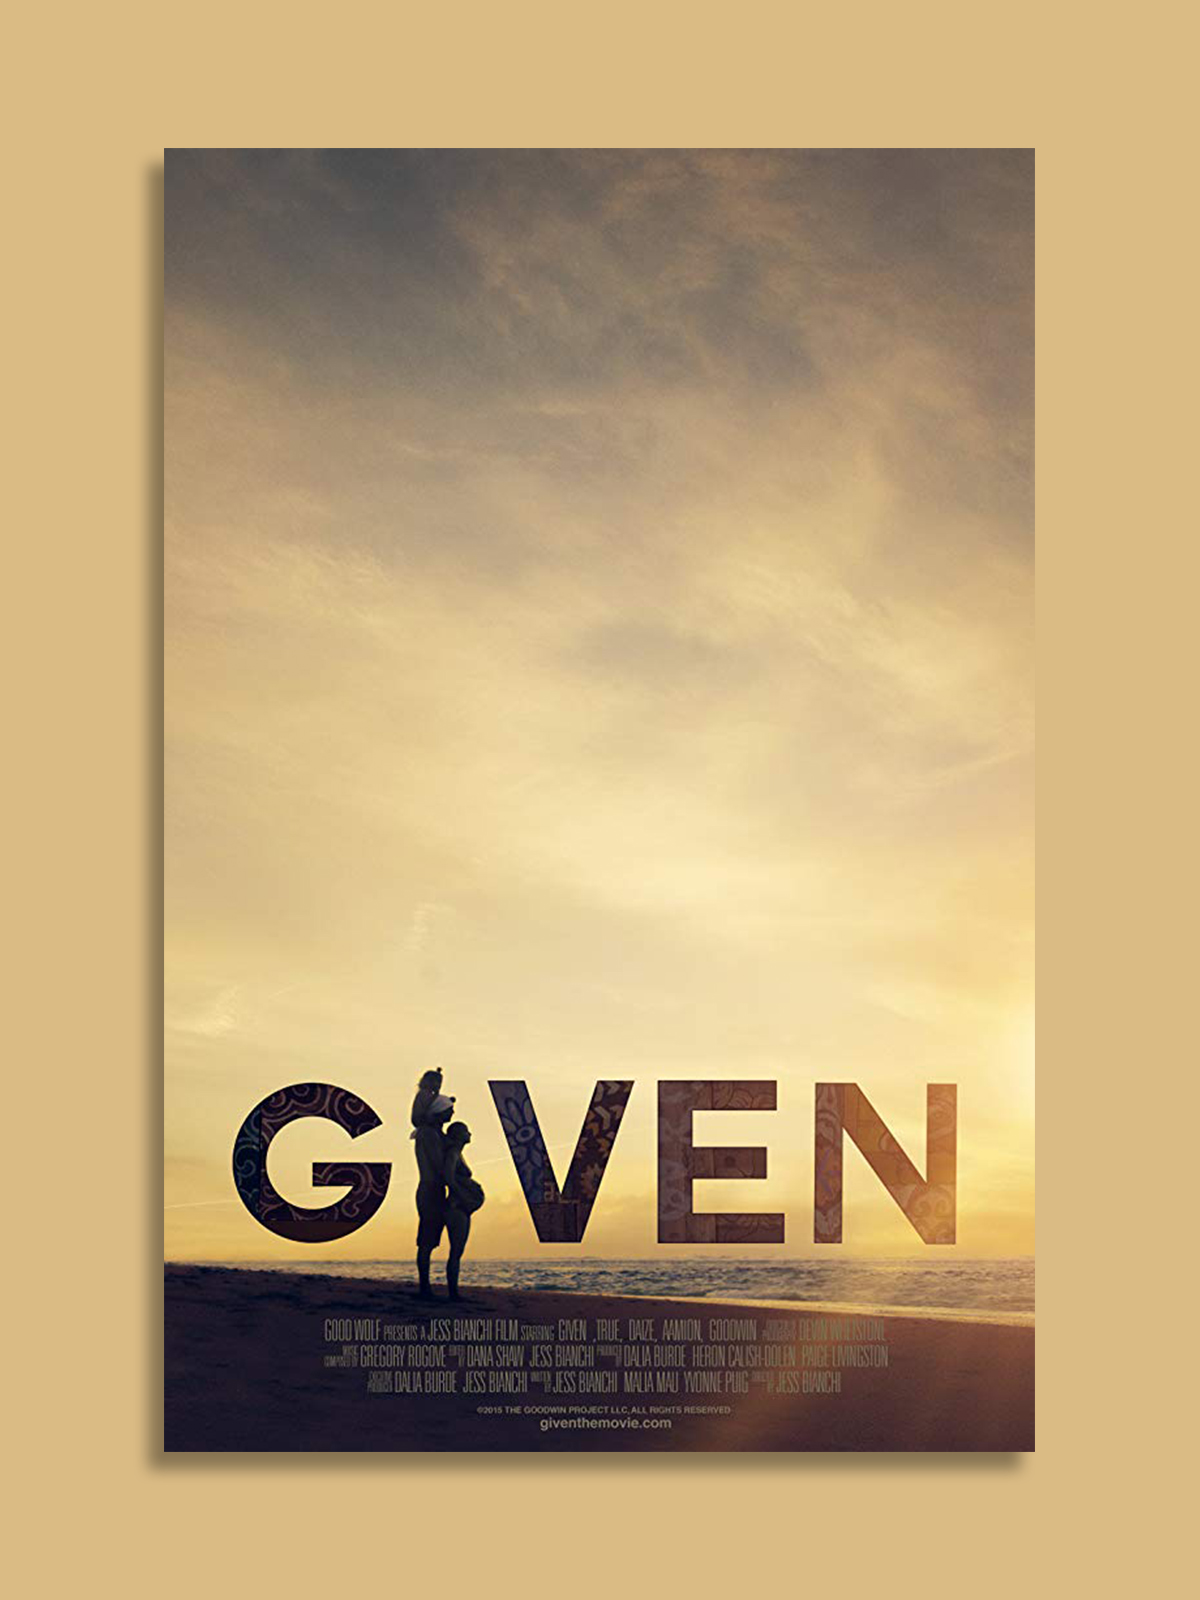 Given Aside from making you want to move to a tropical paradise and take up surfing, Given will inspire you to be bold, embrace adventure, view the world through a childlike lens, and celebrate nature. Told from the perspective of its 6 year old narrator, Given follows legendary surfers Aamion and Daize Goodwin from their island home of Kauai through 15 different countries in the quest for surf. As the site perfectly describes: Set in wave after wave of stunningly visual earthscapes, Given blooms into a tender yet stirring exploration of a young boy’s understanding of life through his familial bonds and their reverence for nature. Deeply moving, Given gives us the humbling contrast of a small voice voyaging through a big world as it finds its way home again.